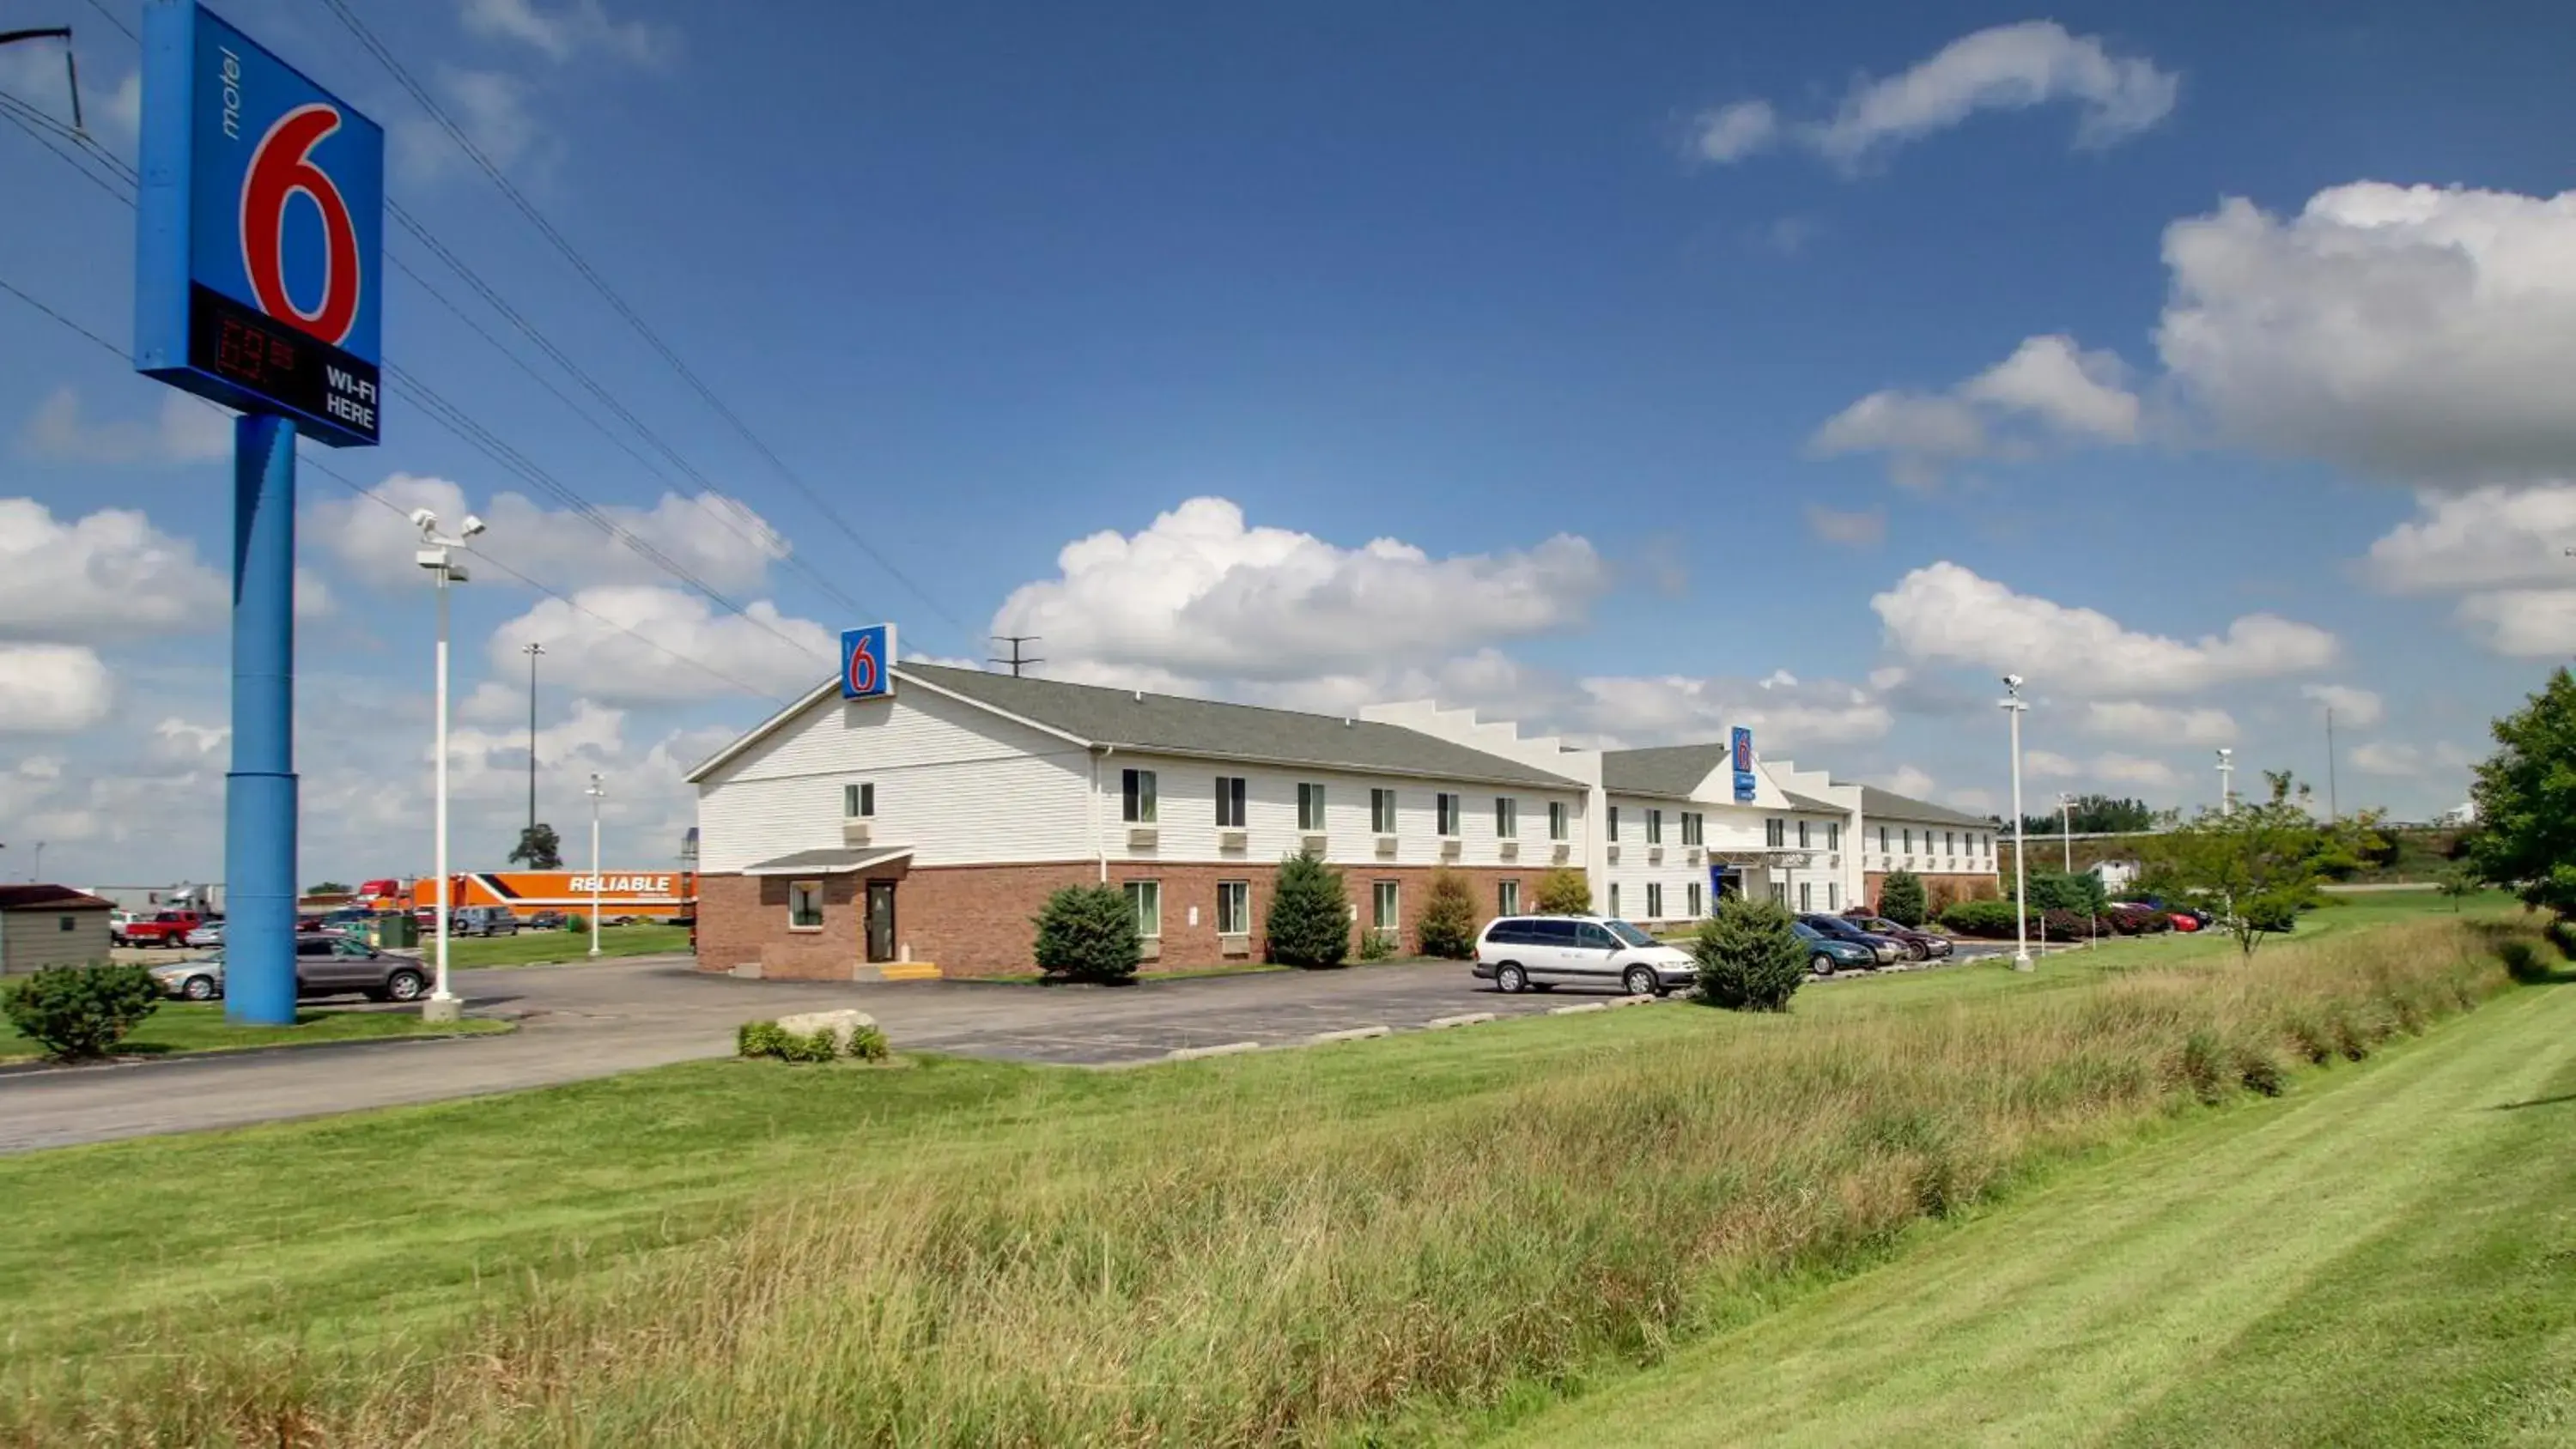 Property Building in Motel 6-Altoona, IA - Des Moines East